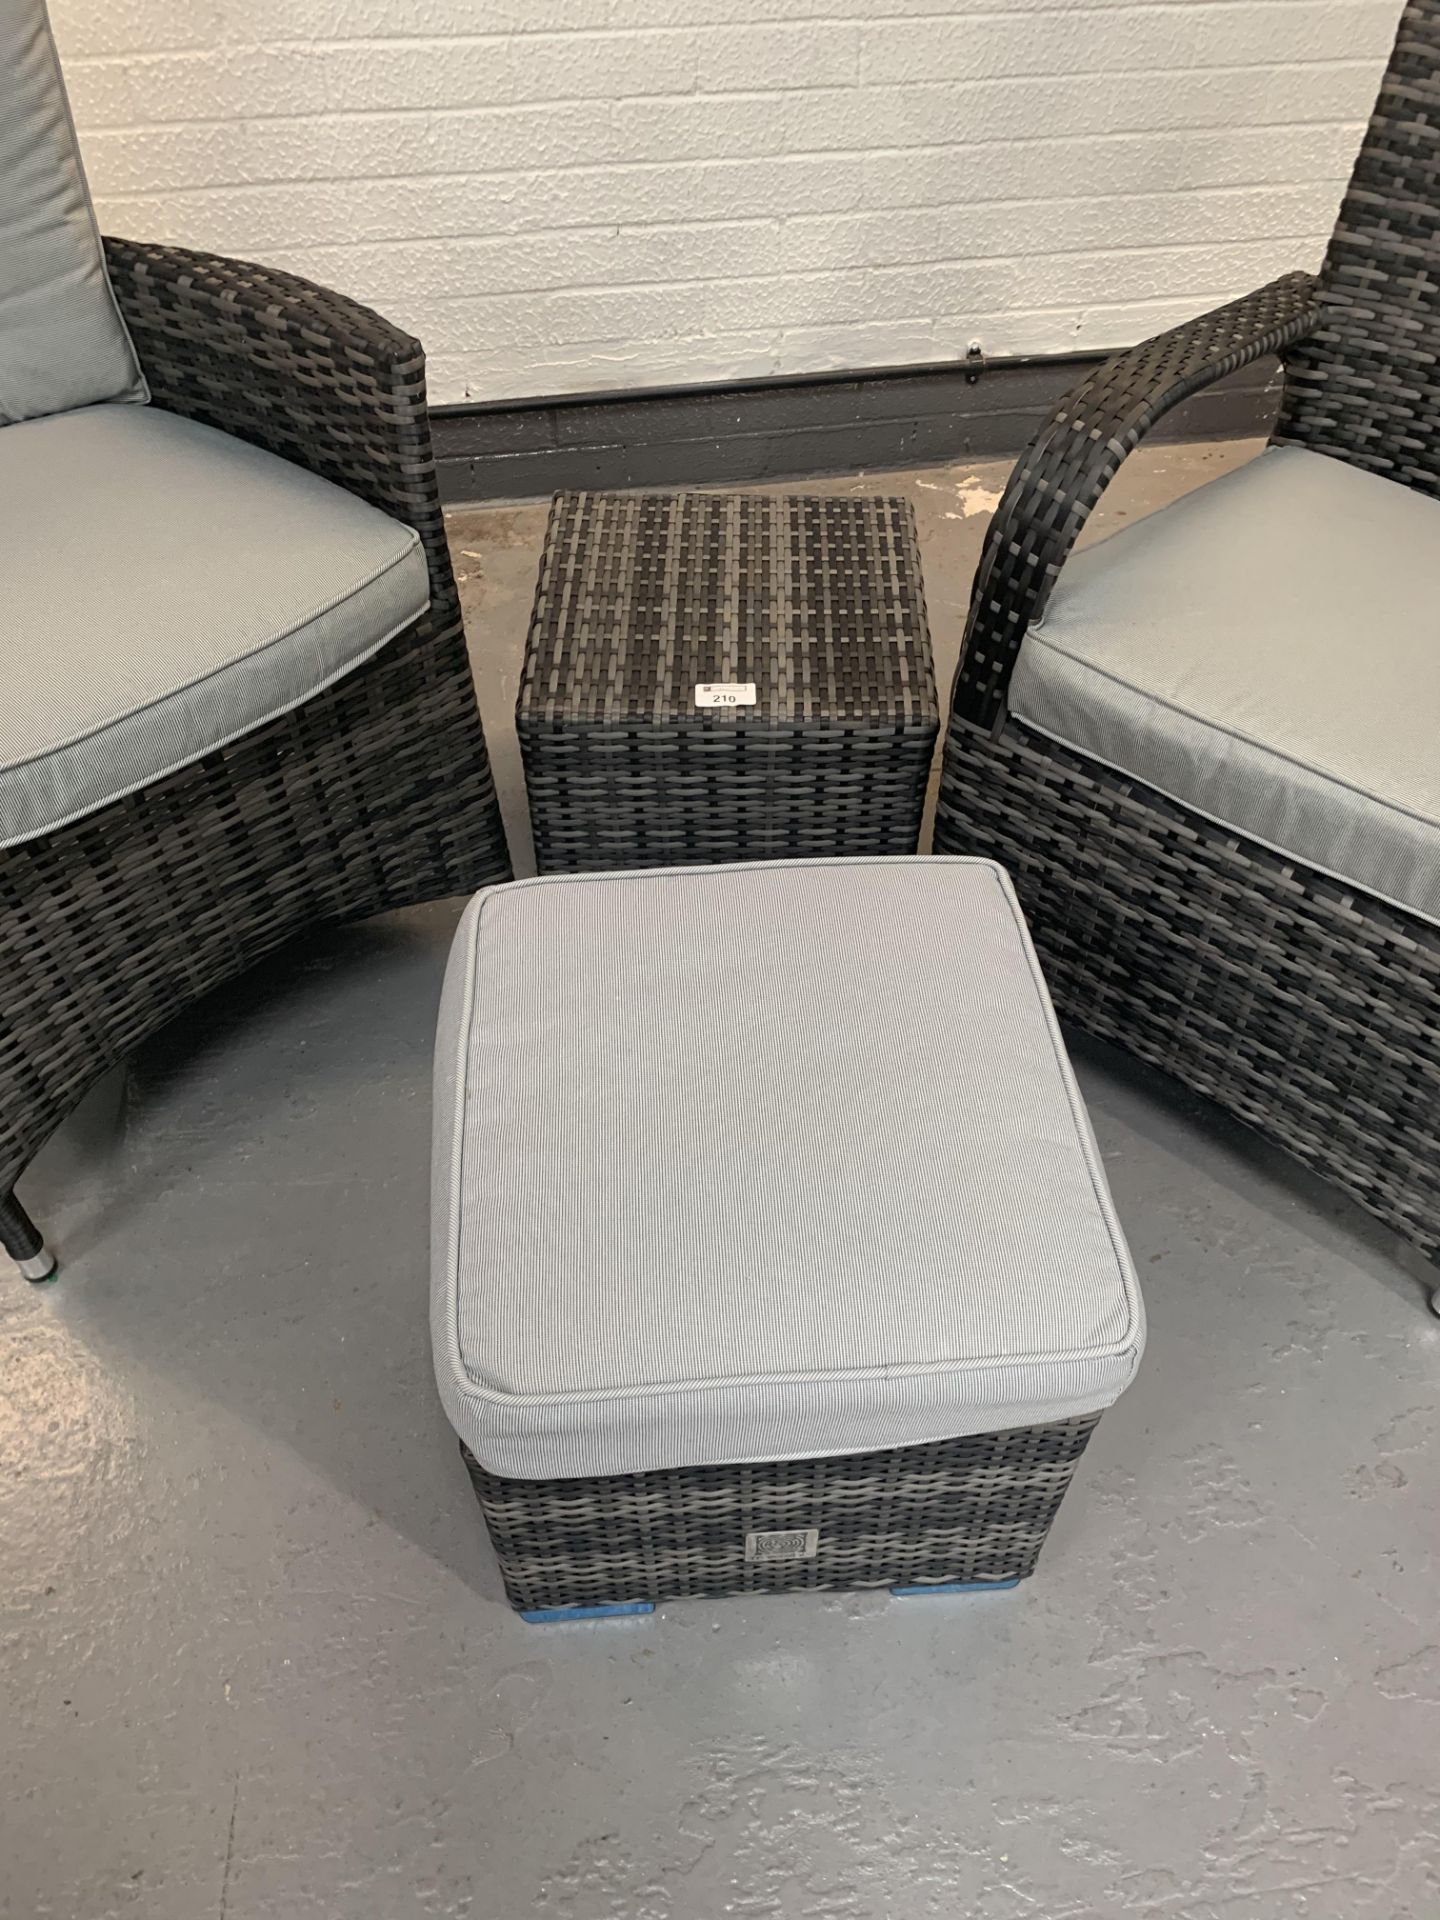 A pair of Grey Maze Rattan arm chairs 1 missing back cushion and 2 footstools - only 1 x cushion - Image 2 of 4